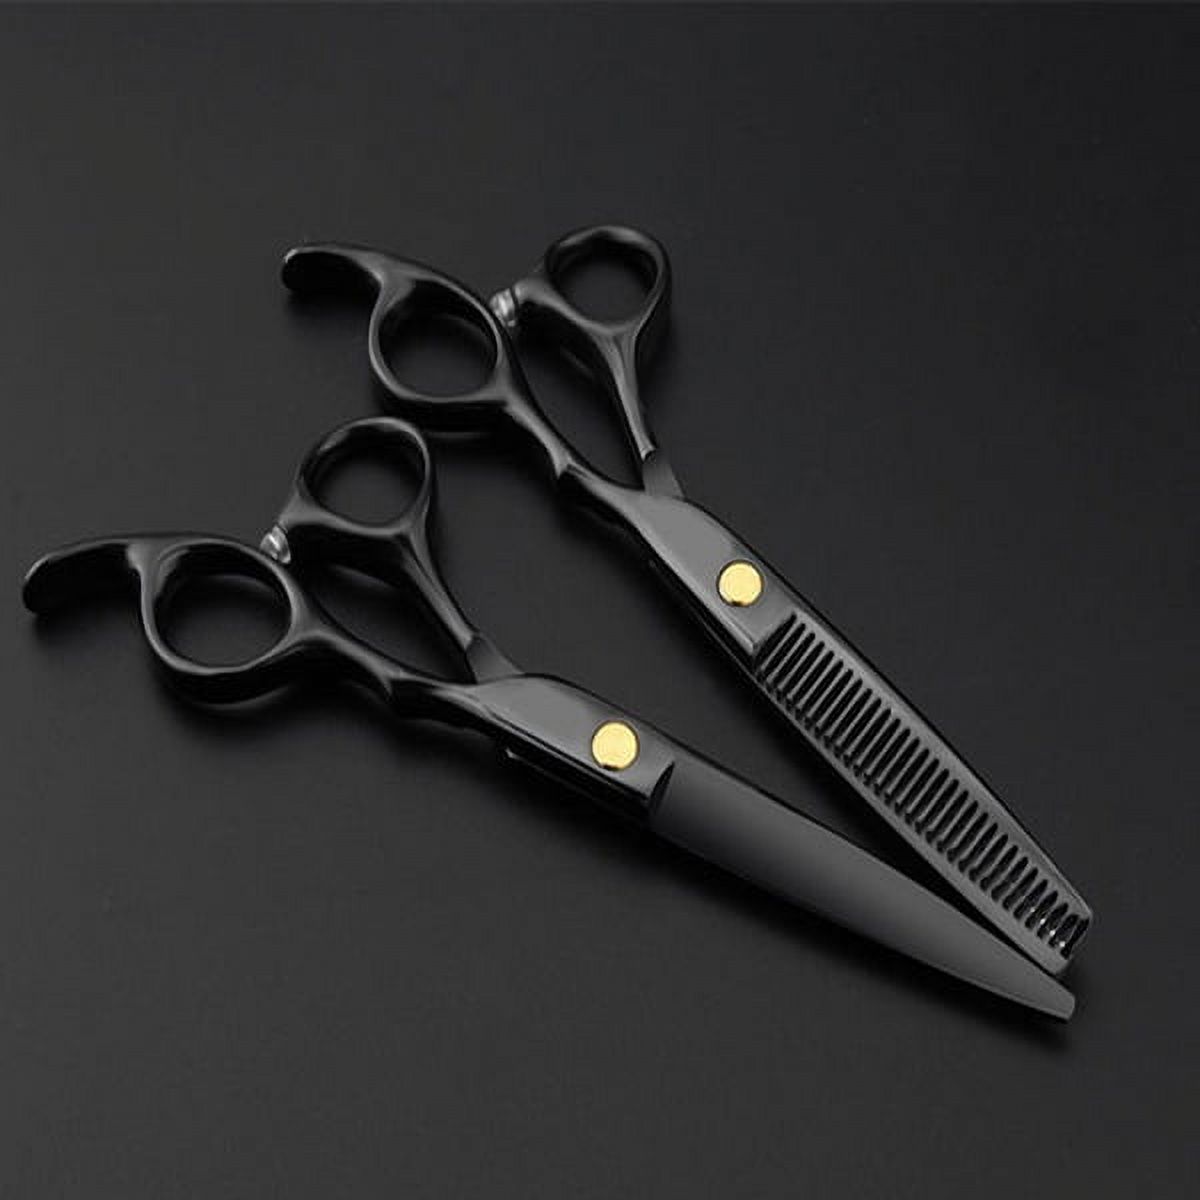 Willstar 3/9pcs Hair Cutting Scissors Set Professional Stainless Steel Barber Thinning Scissors for Barber Salon and Home - image 6 of 16